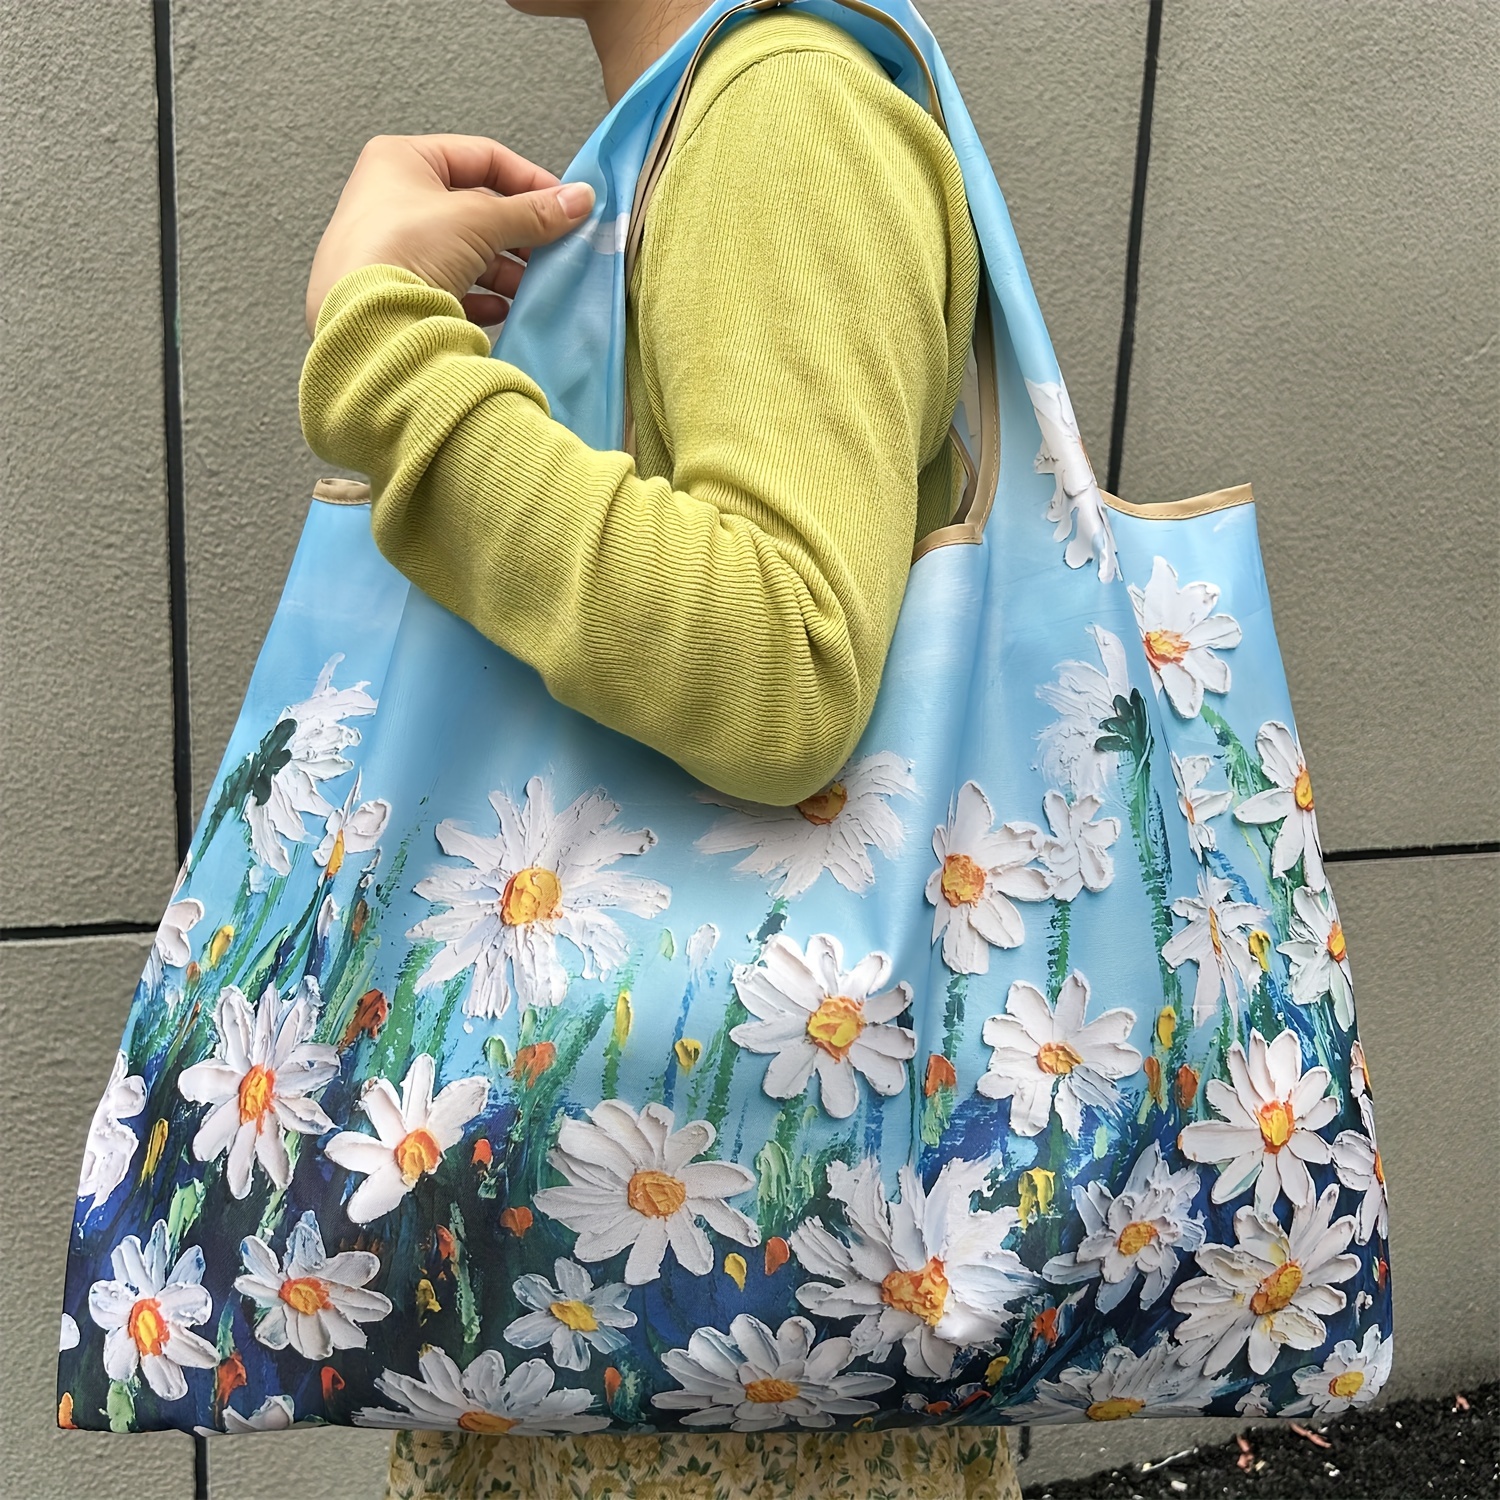 

Oil Painting Daisy Print Large Capacity Portable Shopping Bag For Menwomen, Reusable Lightweight Soft Tote Bag, Foldable Shoulder Handbag, Casual Daypack For Going Out